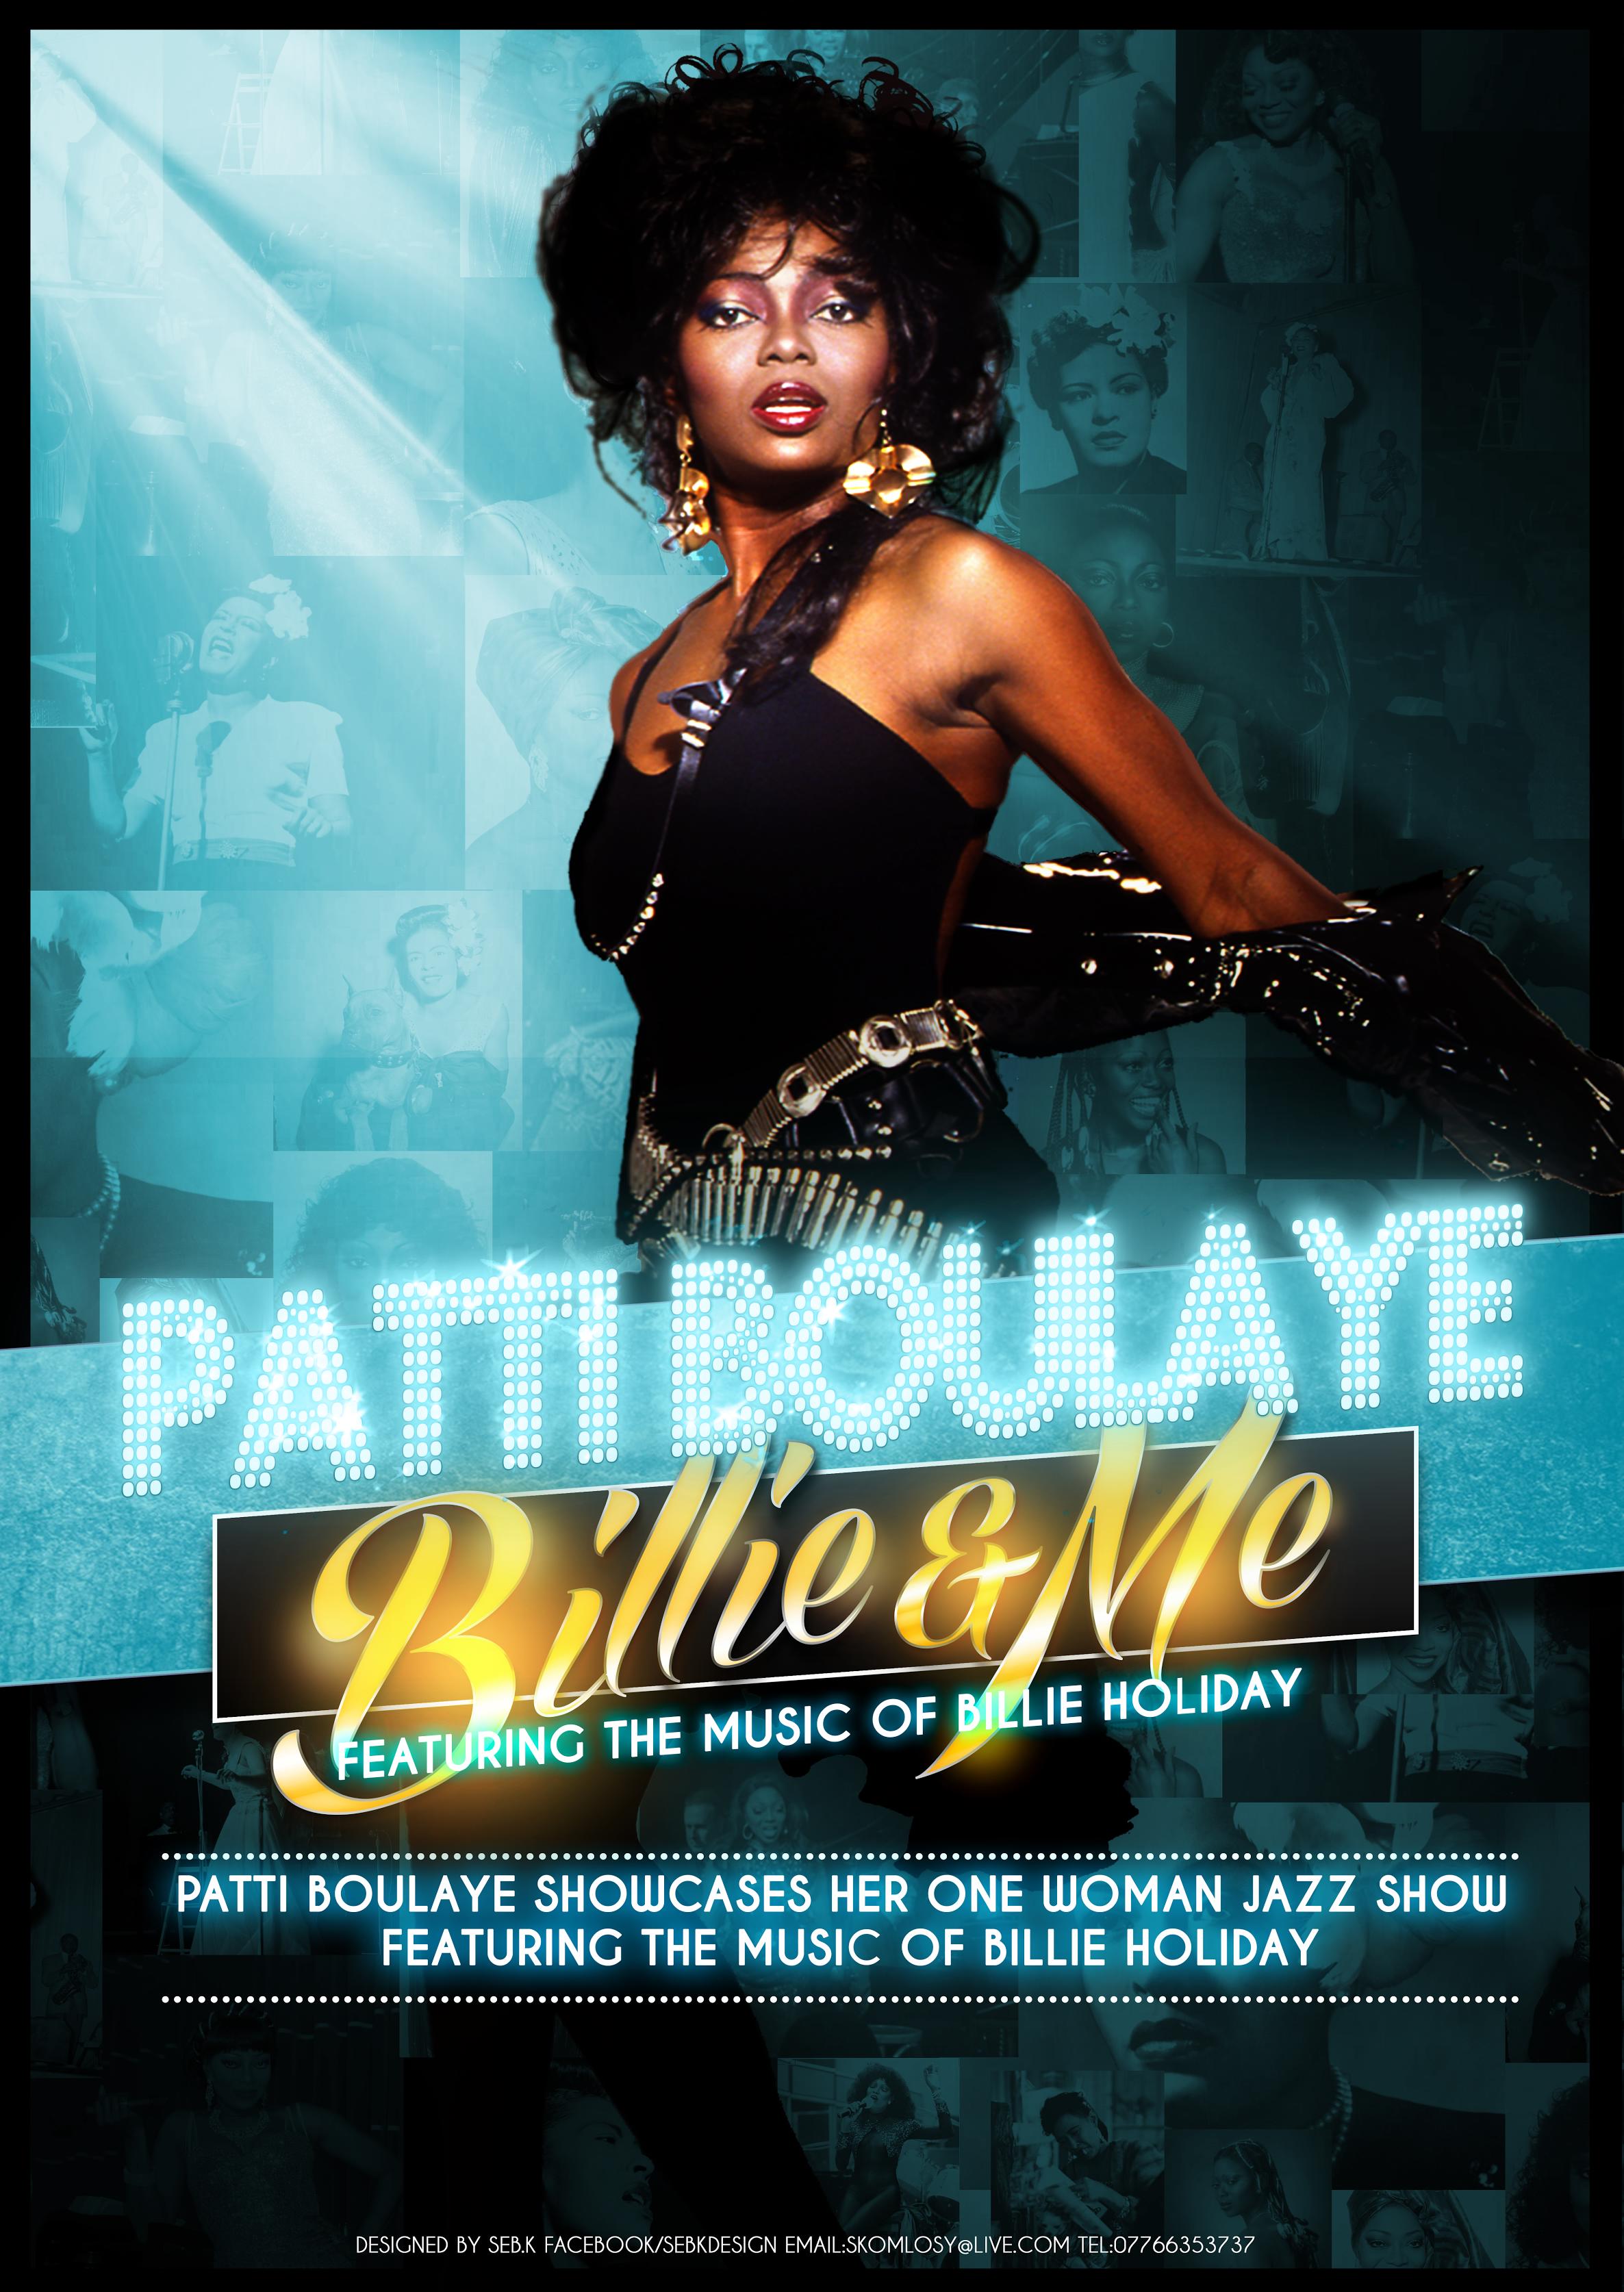 Patti Boulaye 'Billie & Me' feat: The Music of Billie Holiday